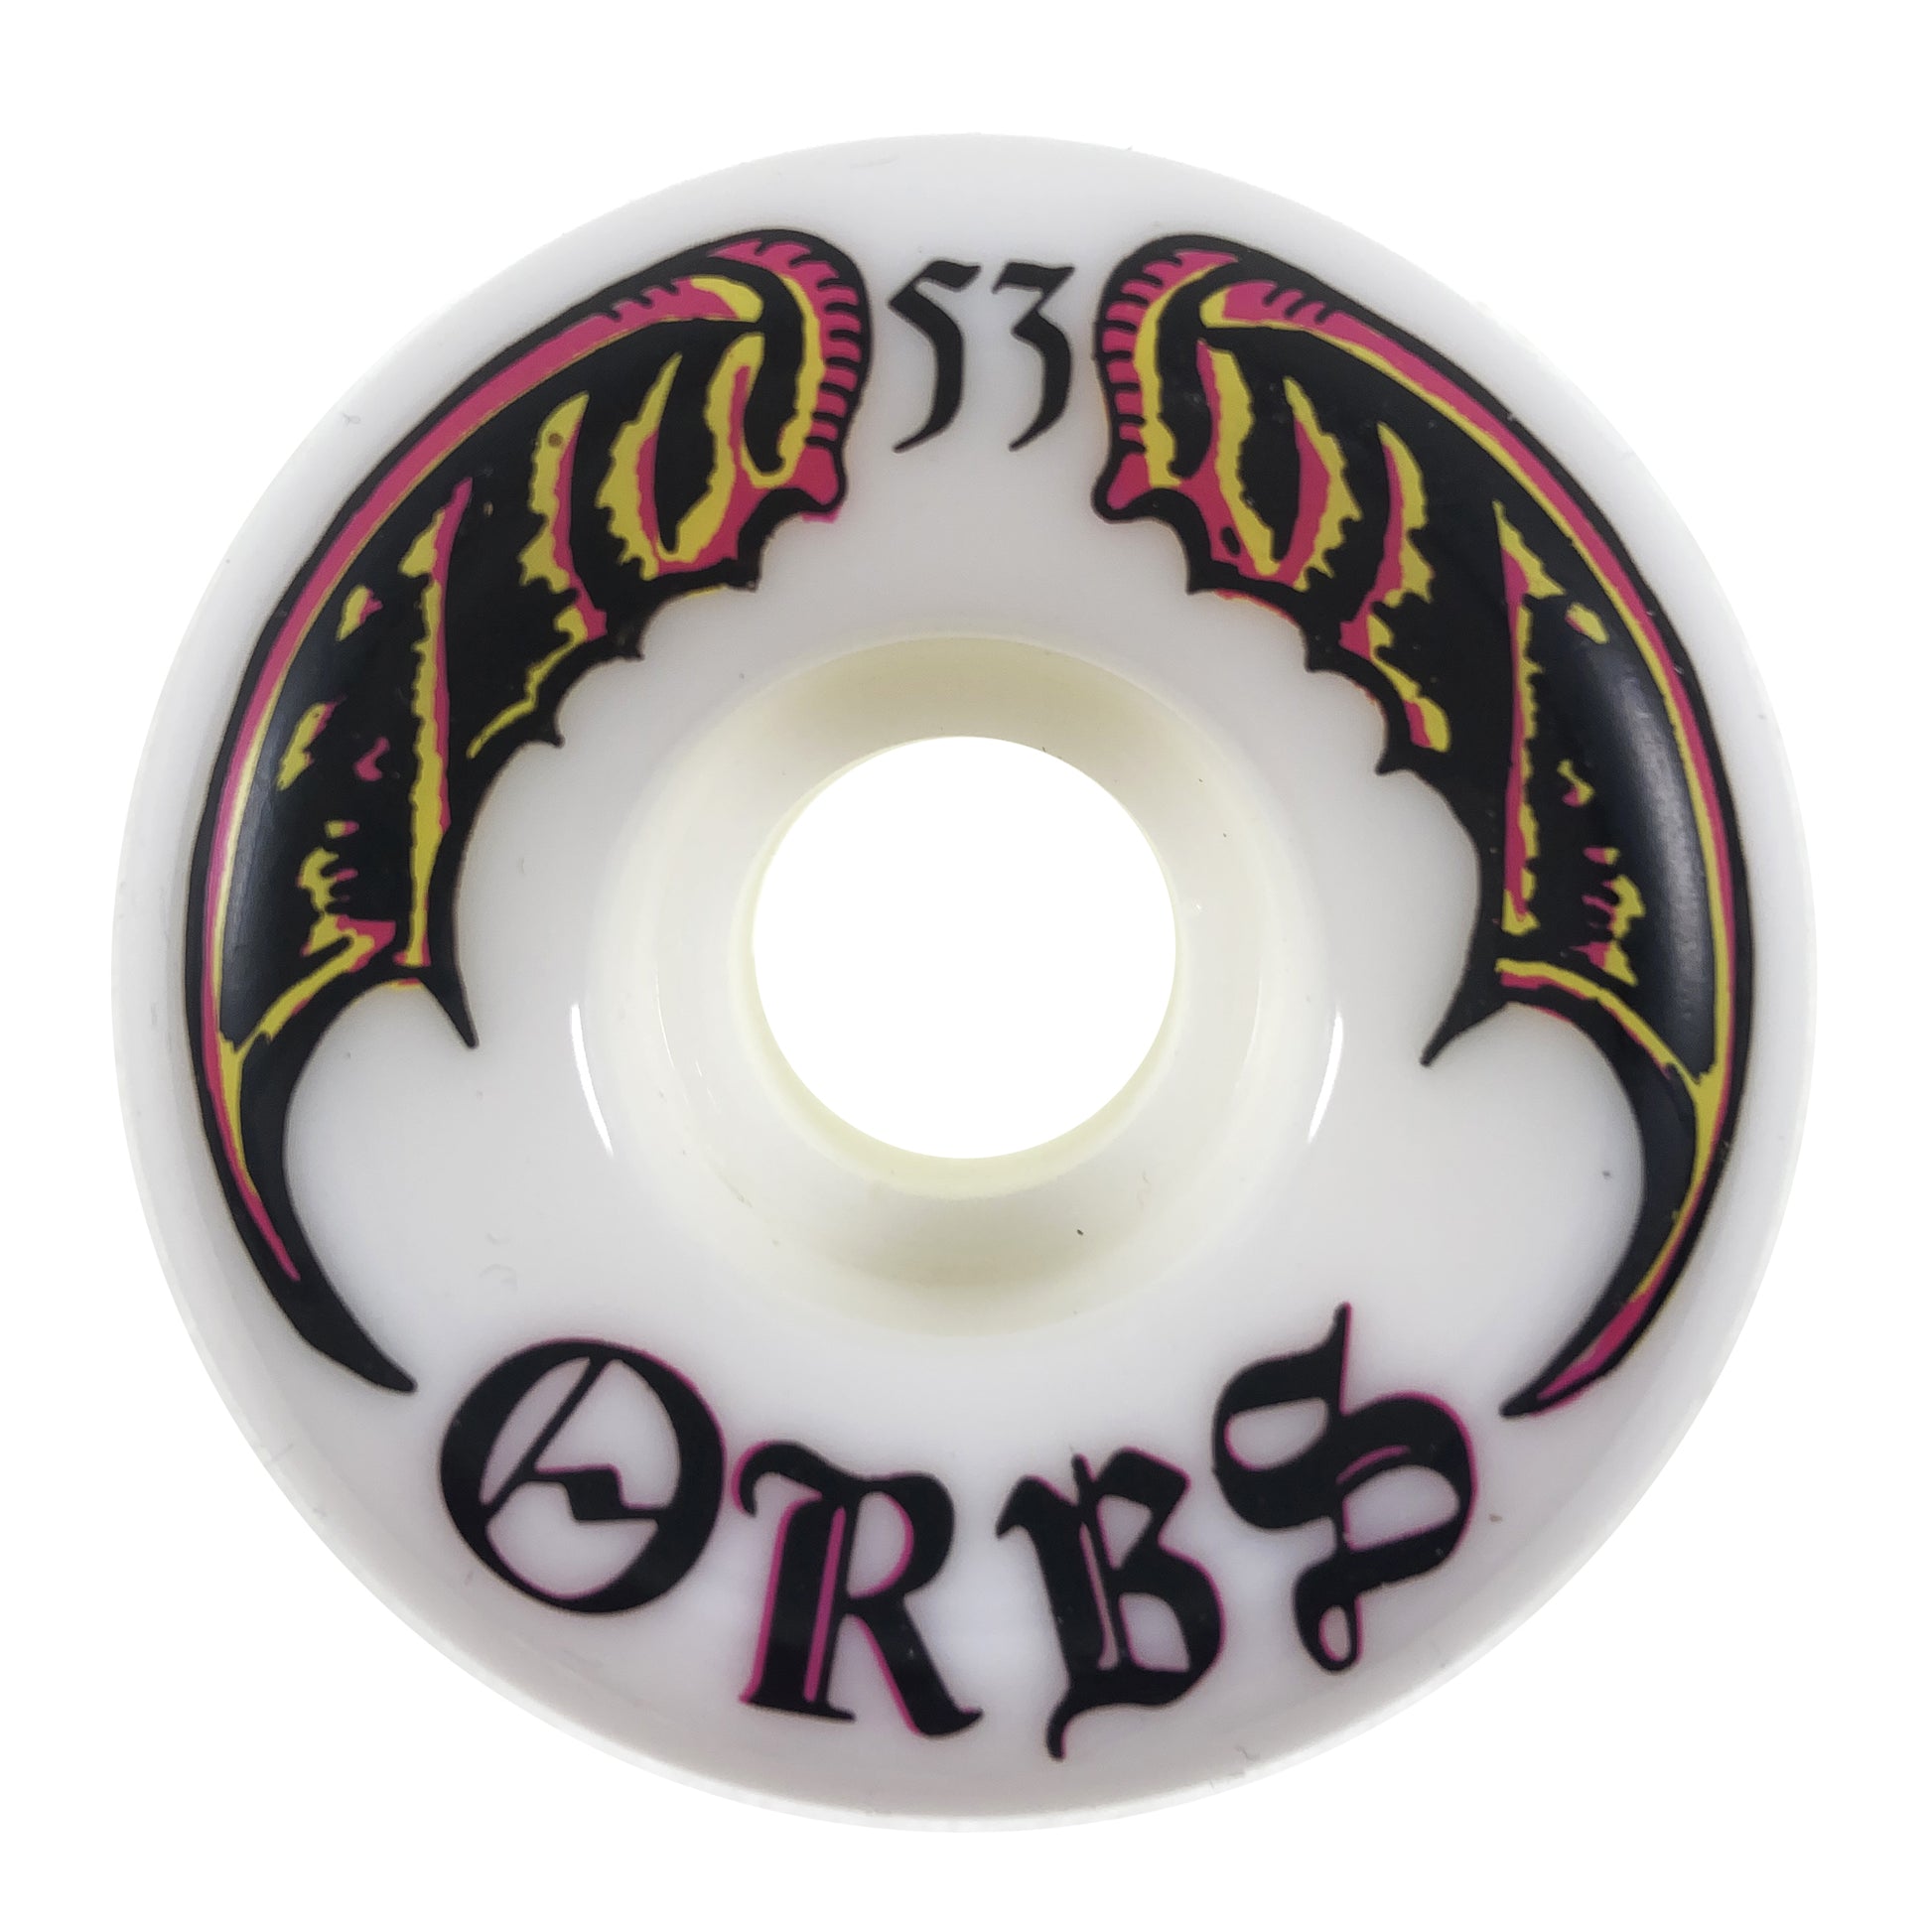 Orbs - 53mm - 99a Specters Conical - White - Prime Delux Store